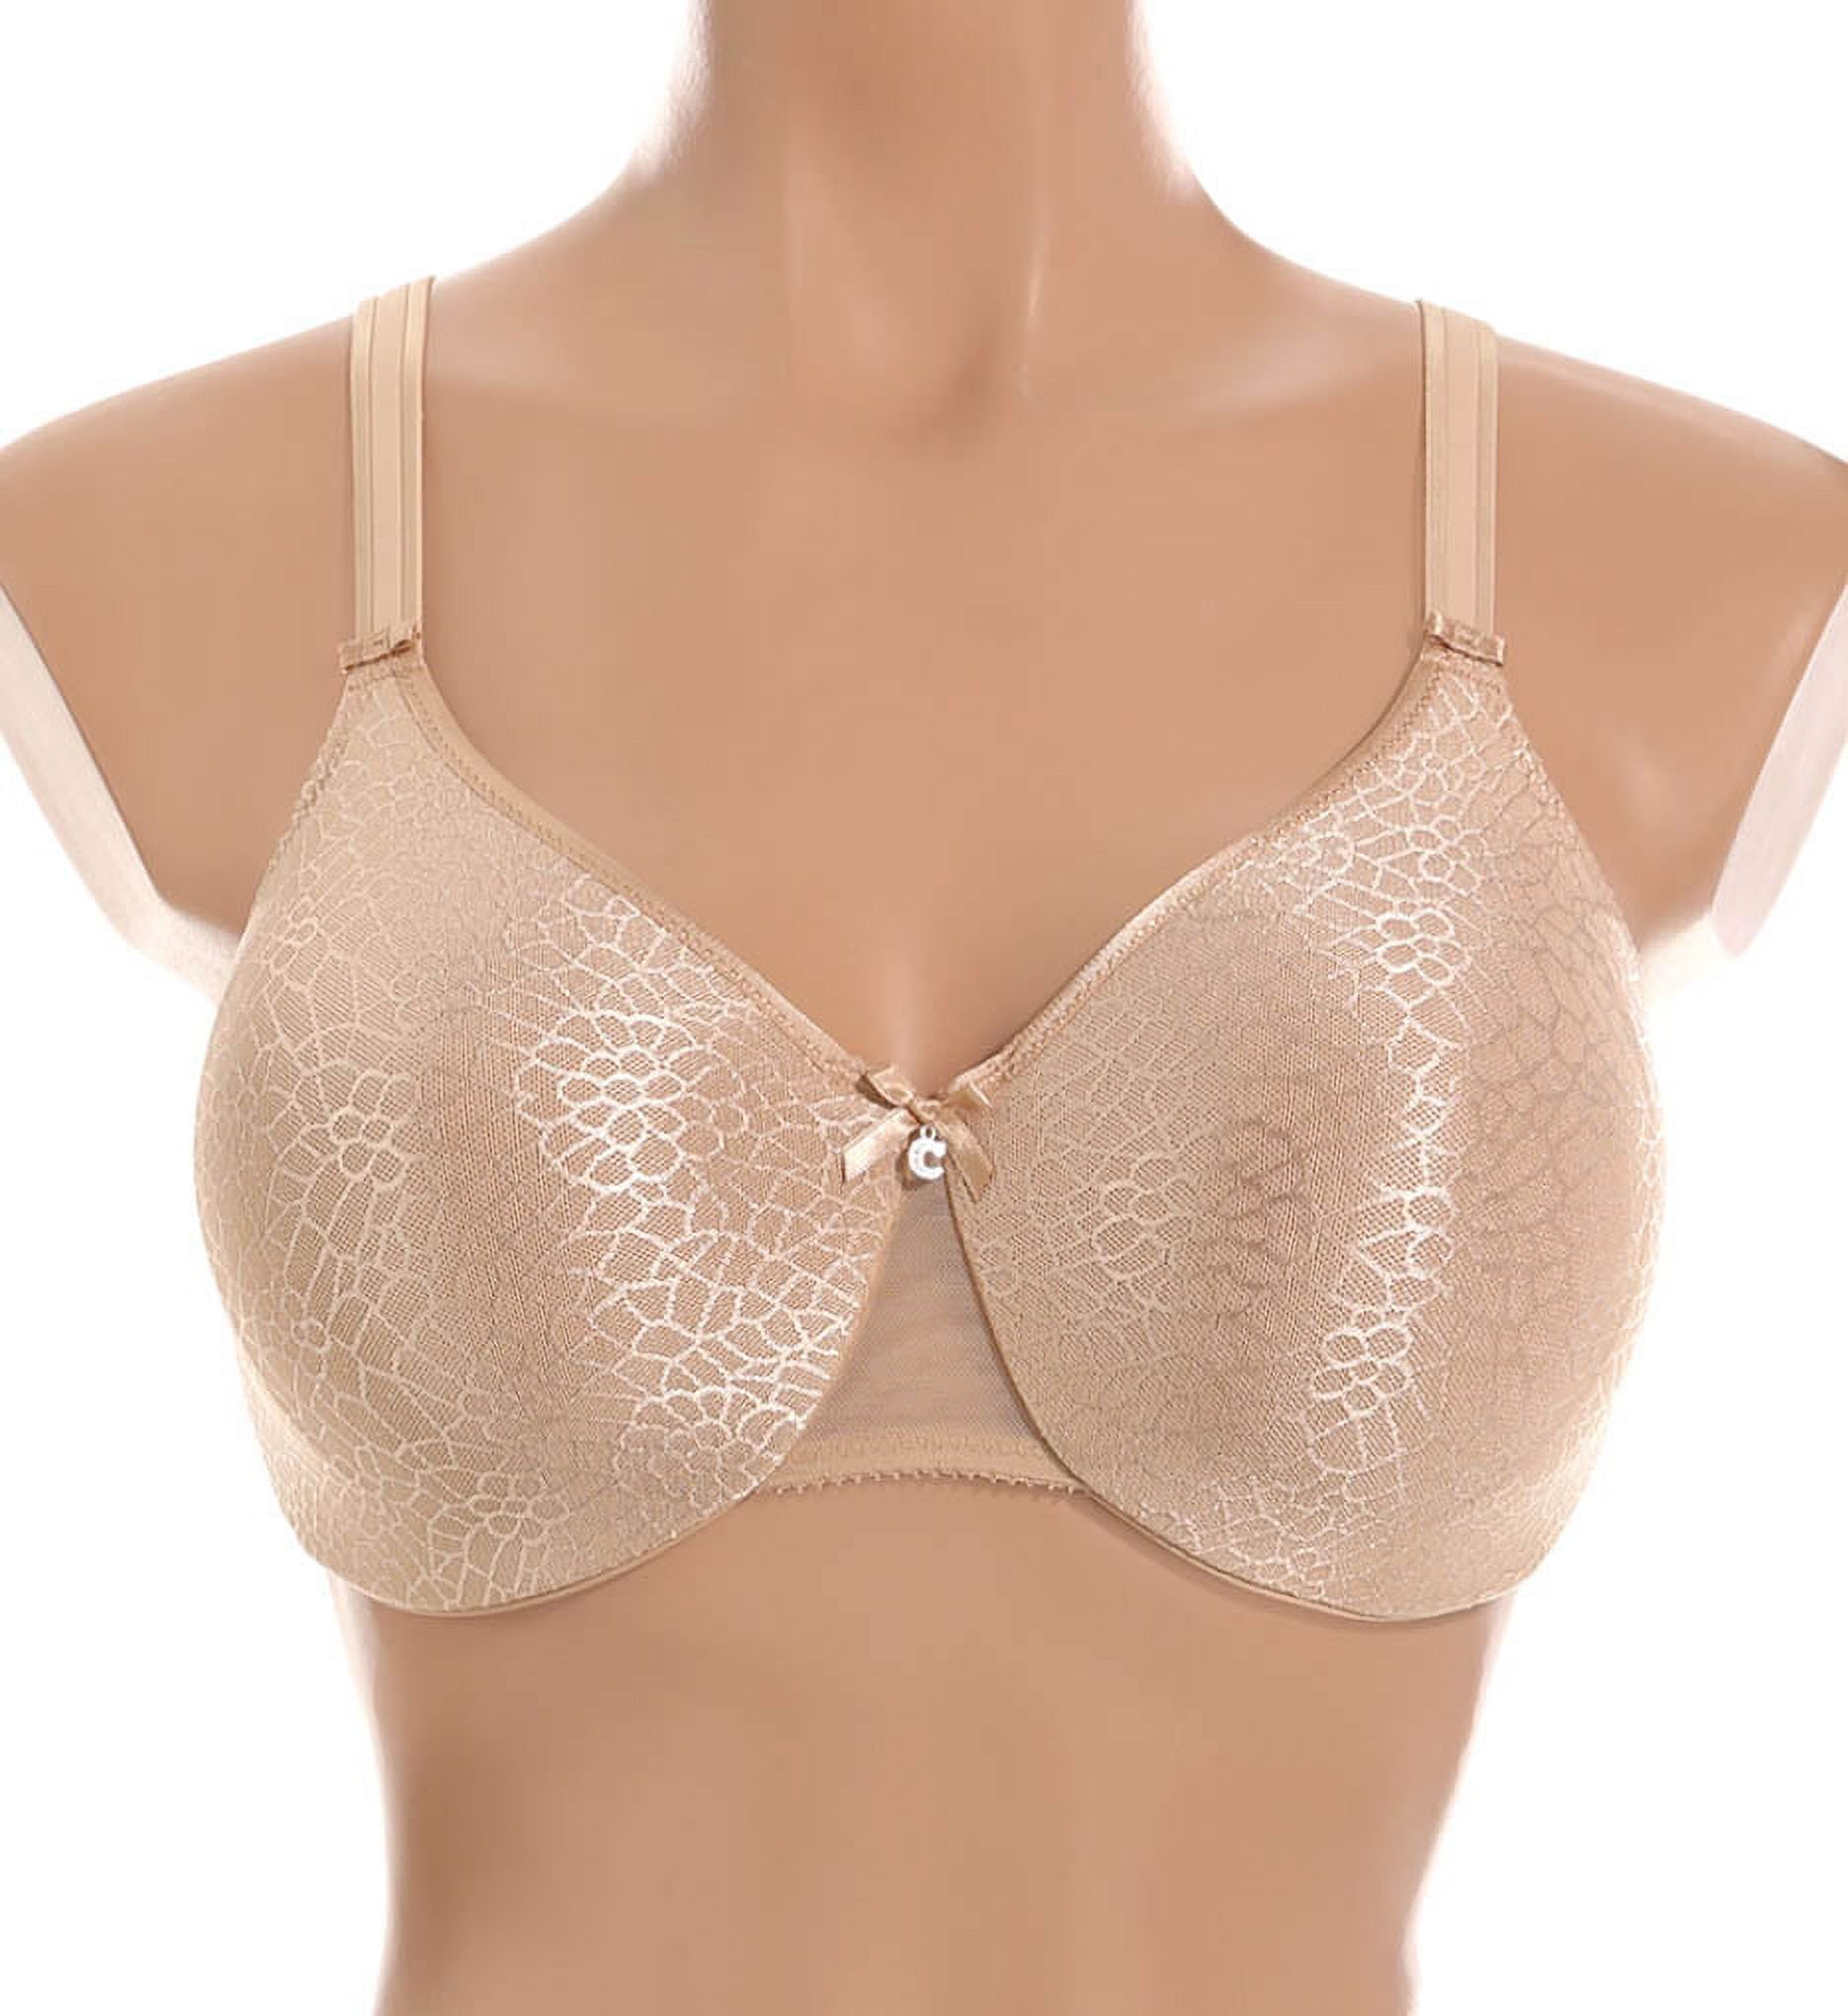 Chantelle Women's C Magnifique Seamless Unlined Minimizer, Ultra Nude, 32G  : Buy Online at Best Price in KSA - Souq is now : Fashion